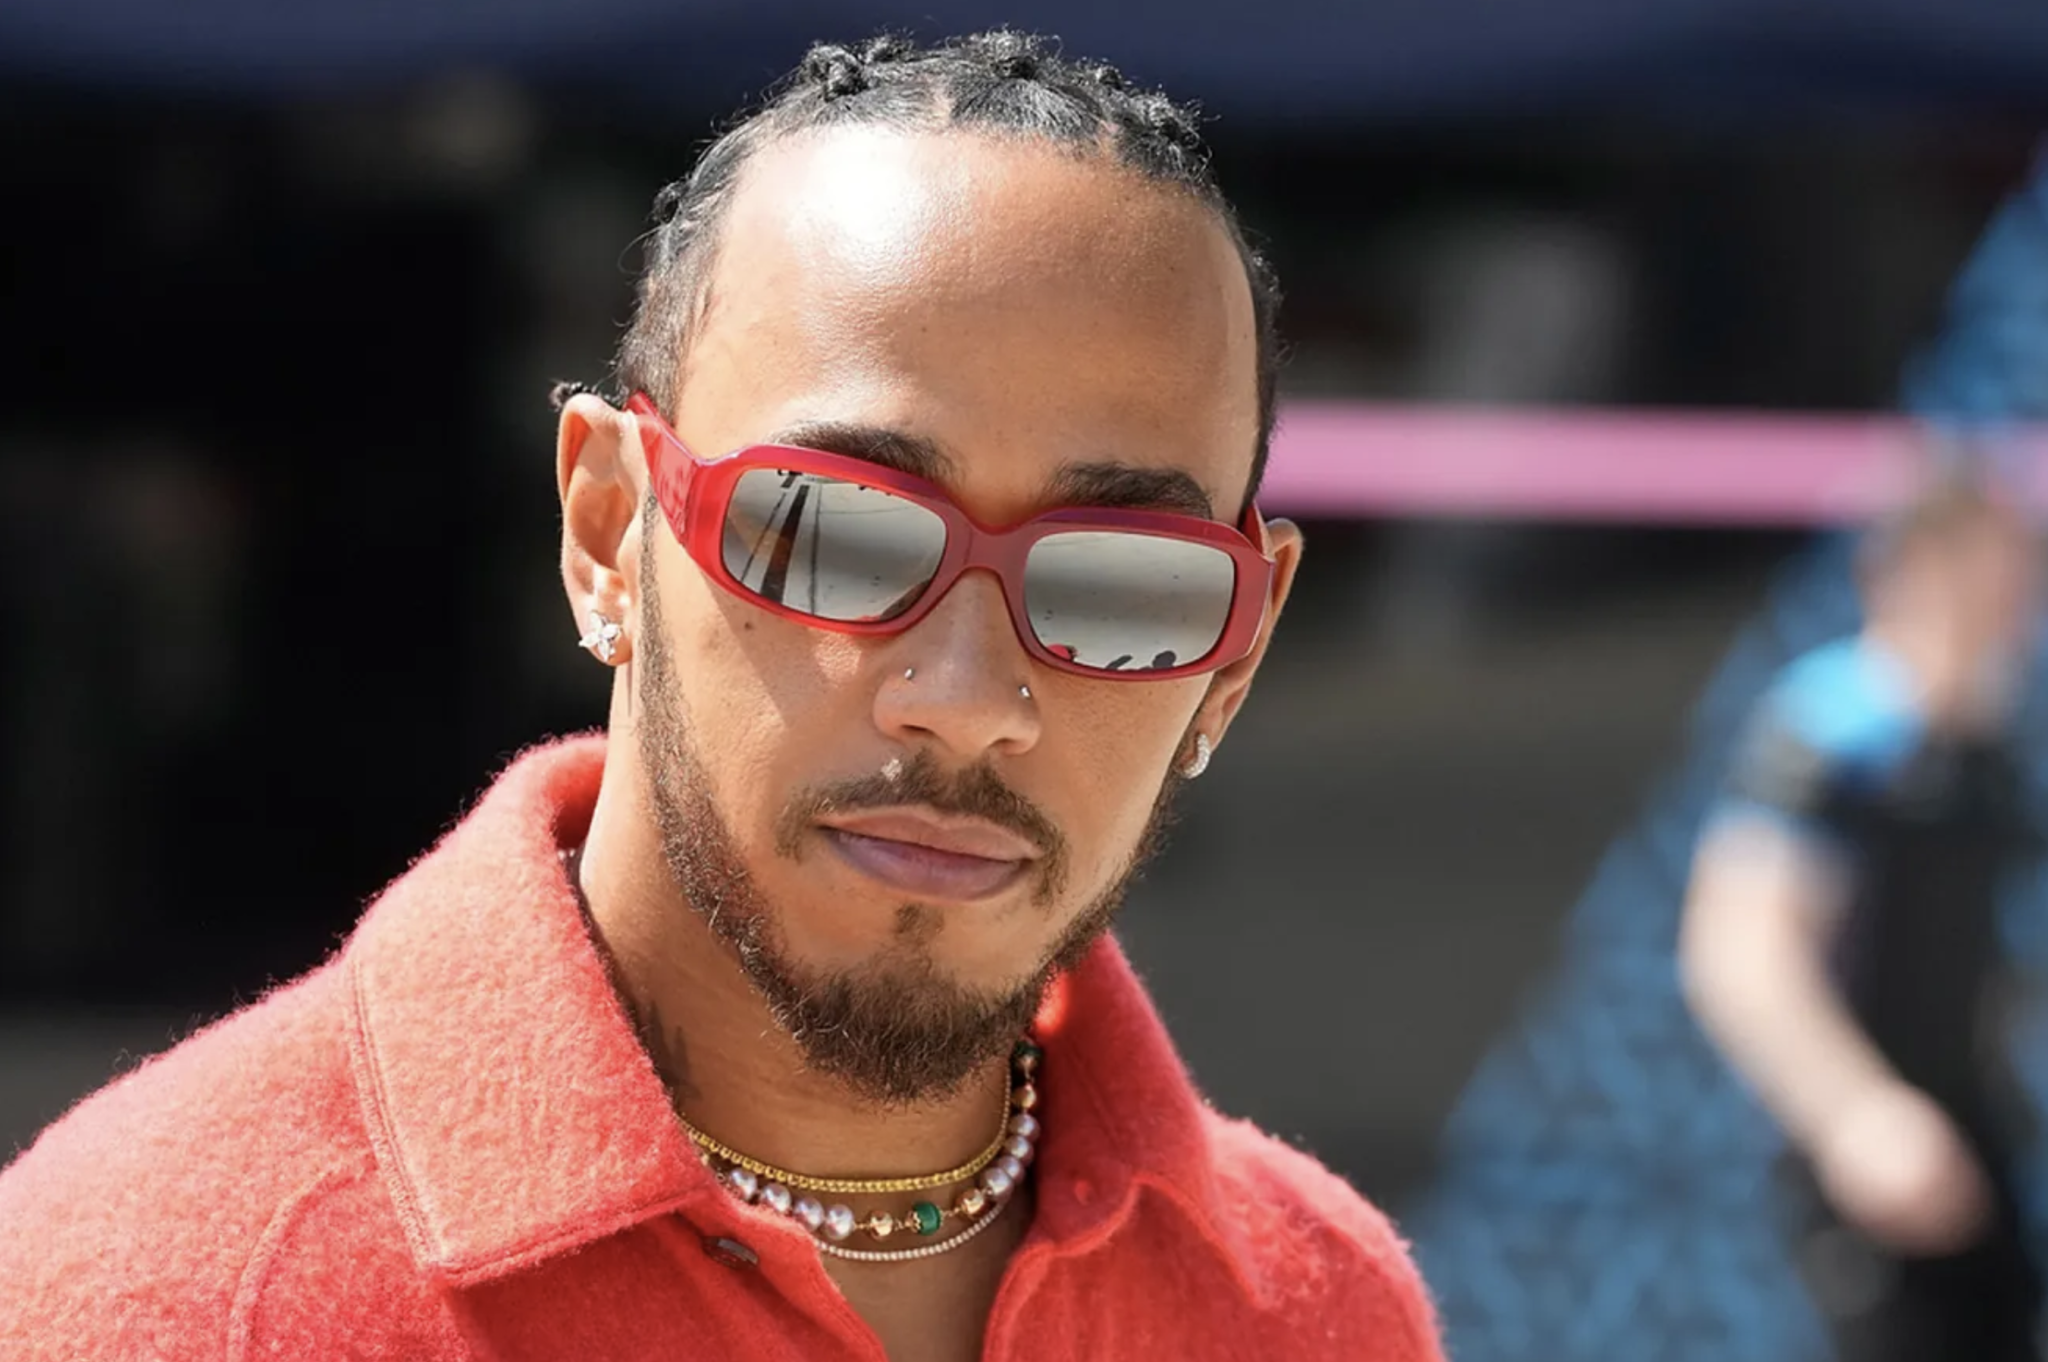 Lewis Hamilton has his first disappointment ahead of Ferrari move